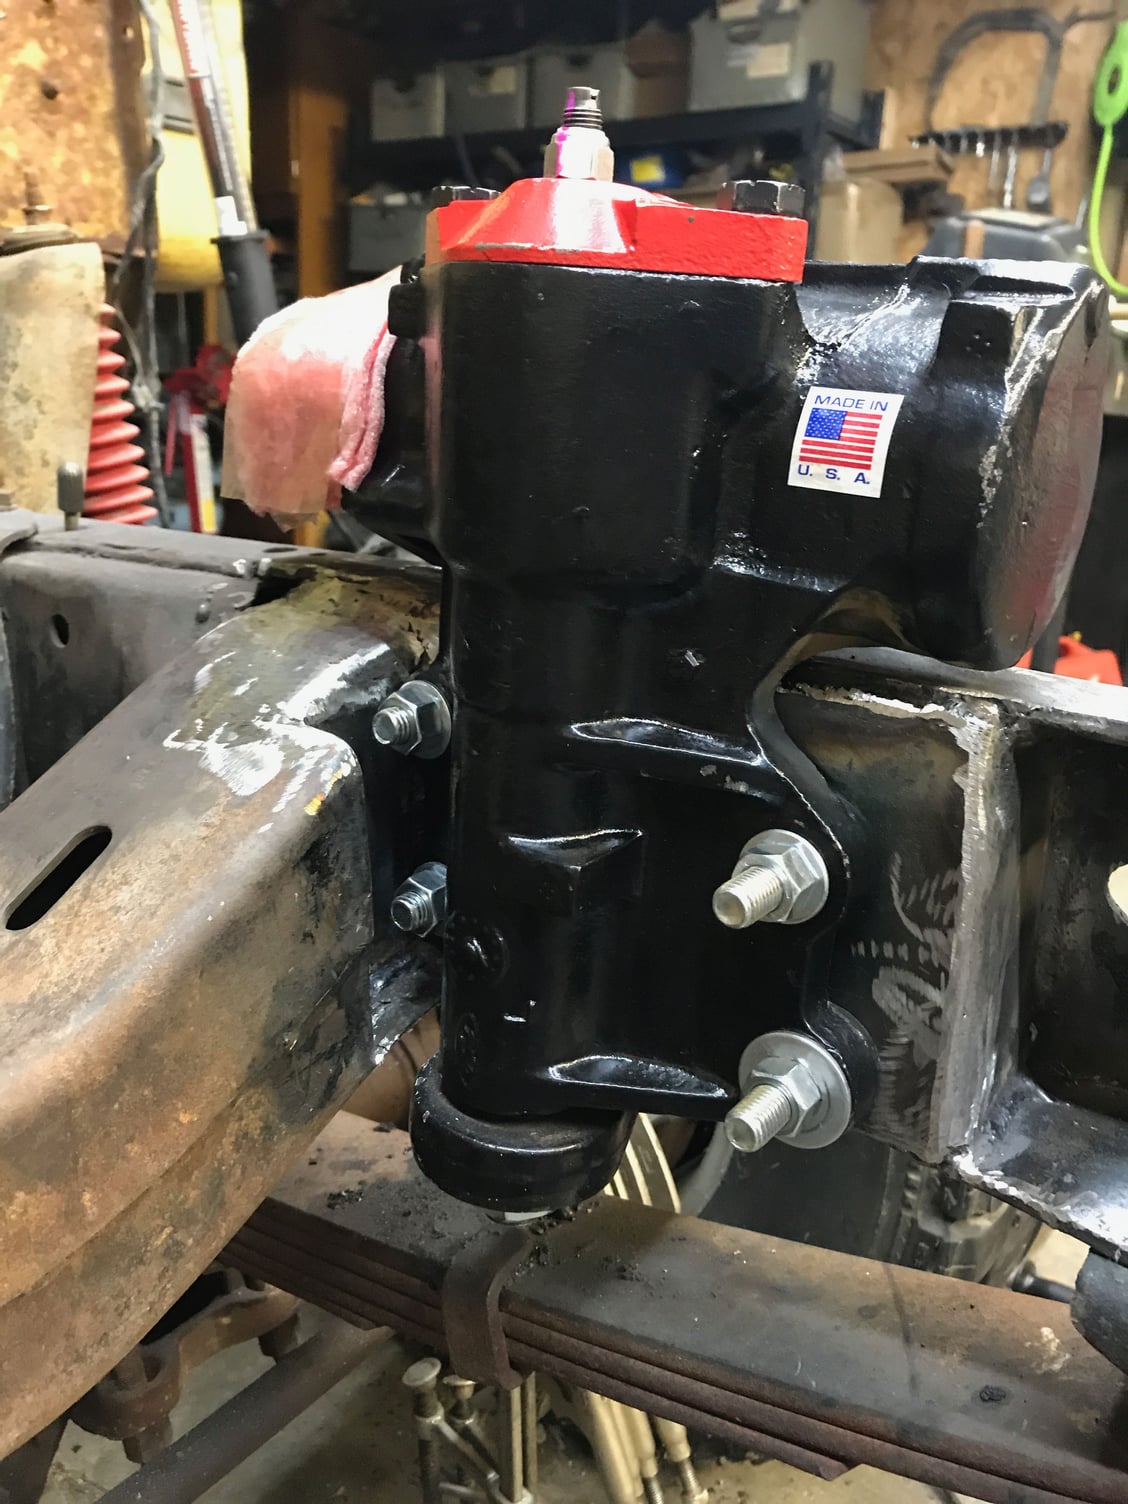 79 f250 steering box on a 76 f250 - Ford Truck Enthusiasts Forums